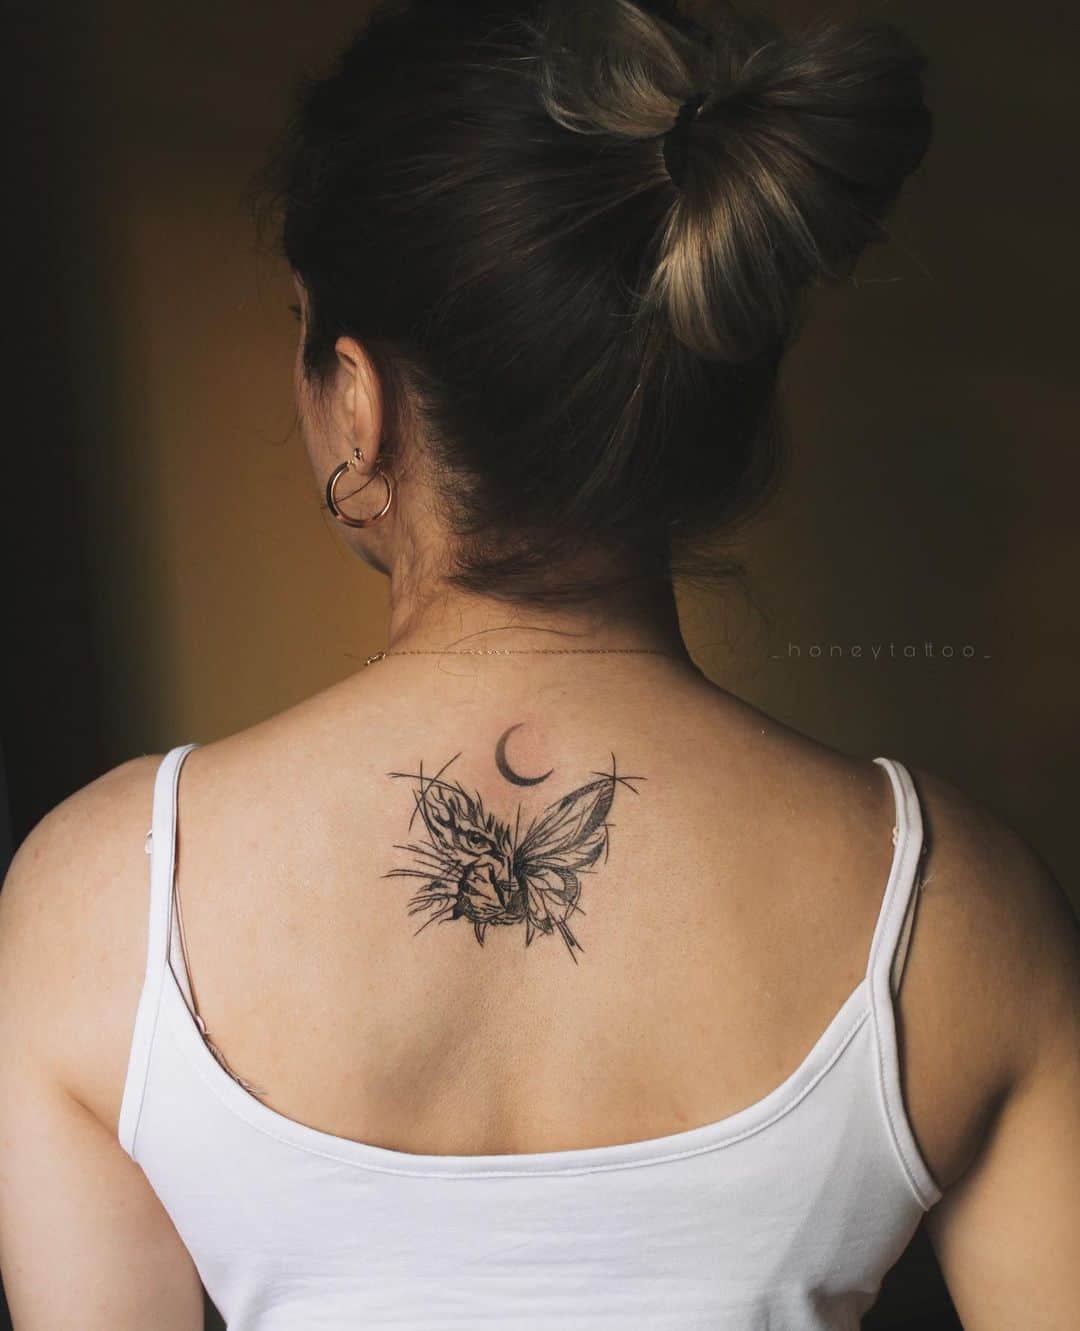 Butterfly on back tattoo by honeytattoo